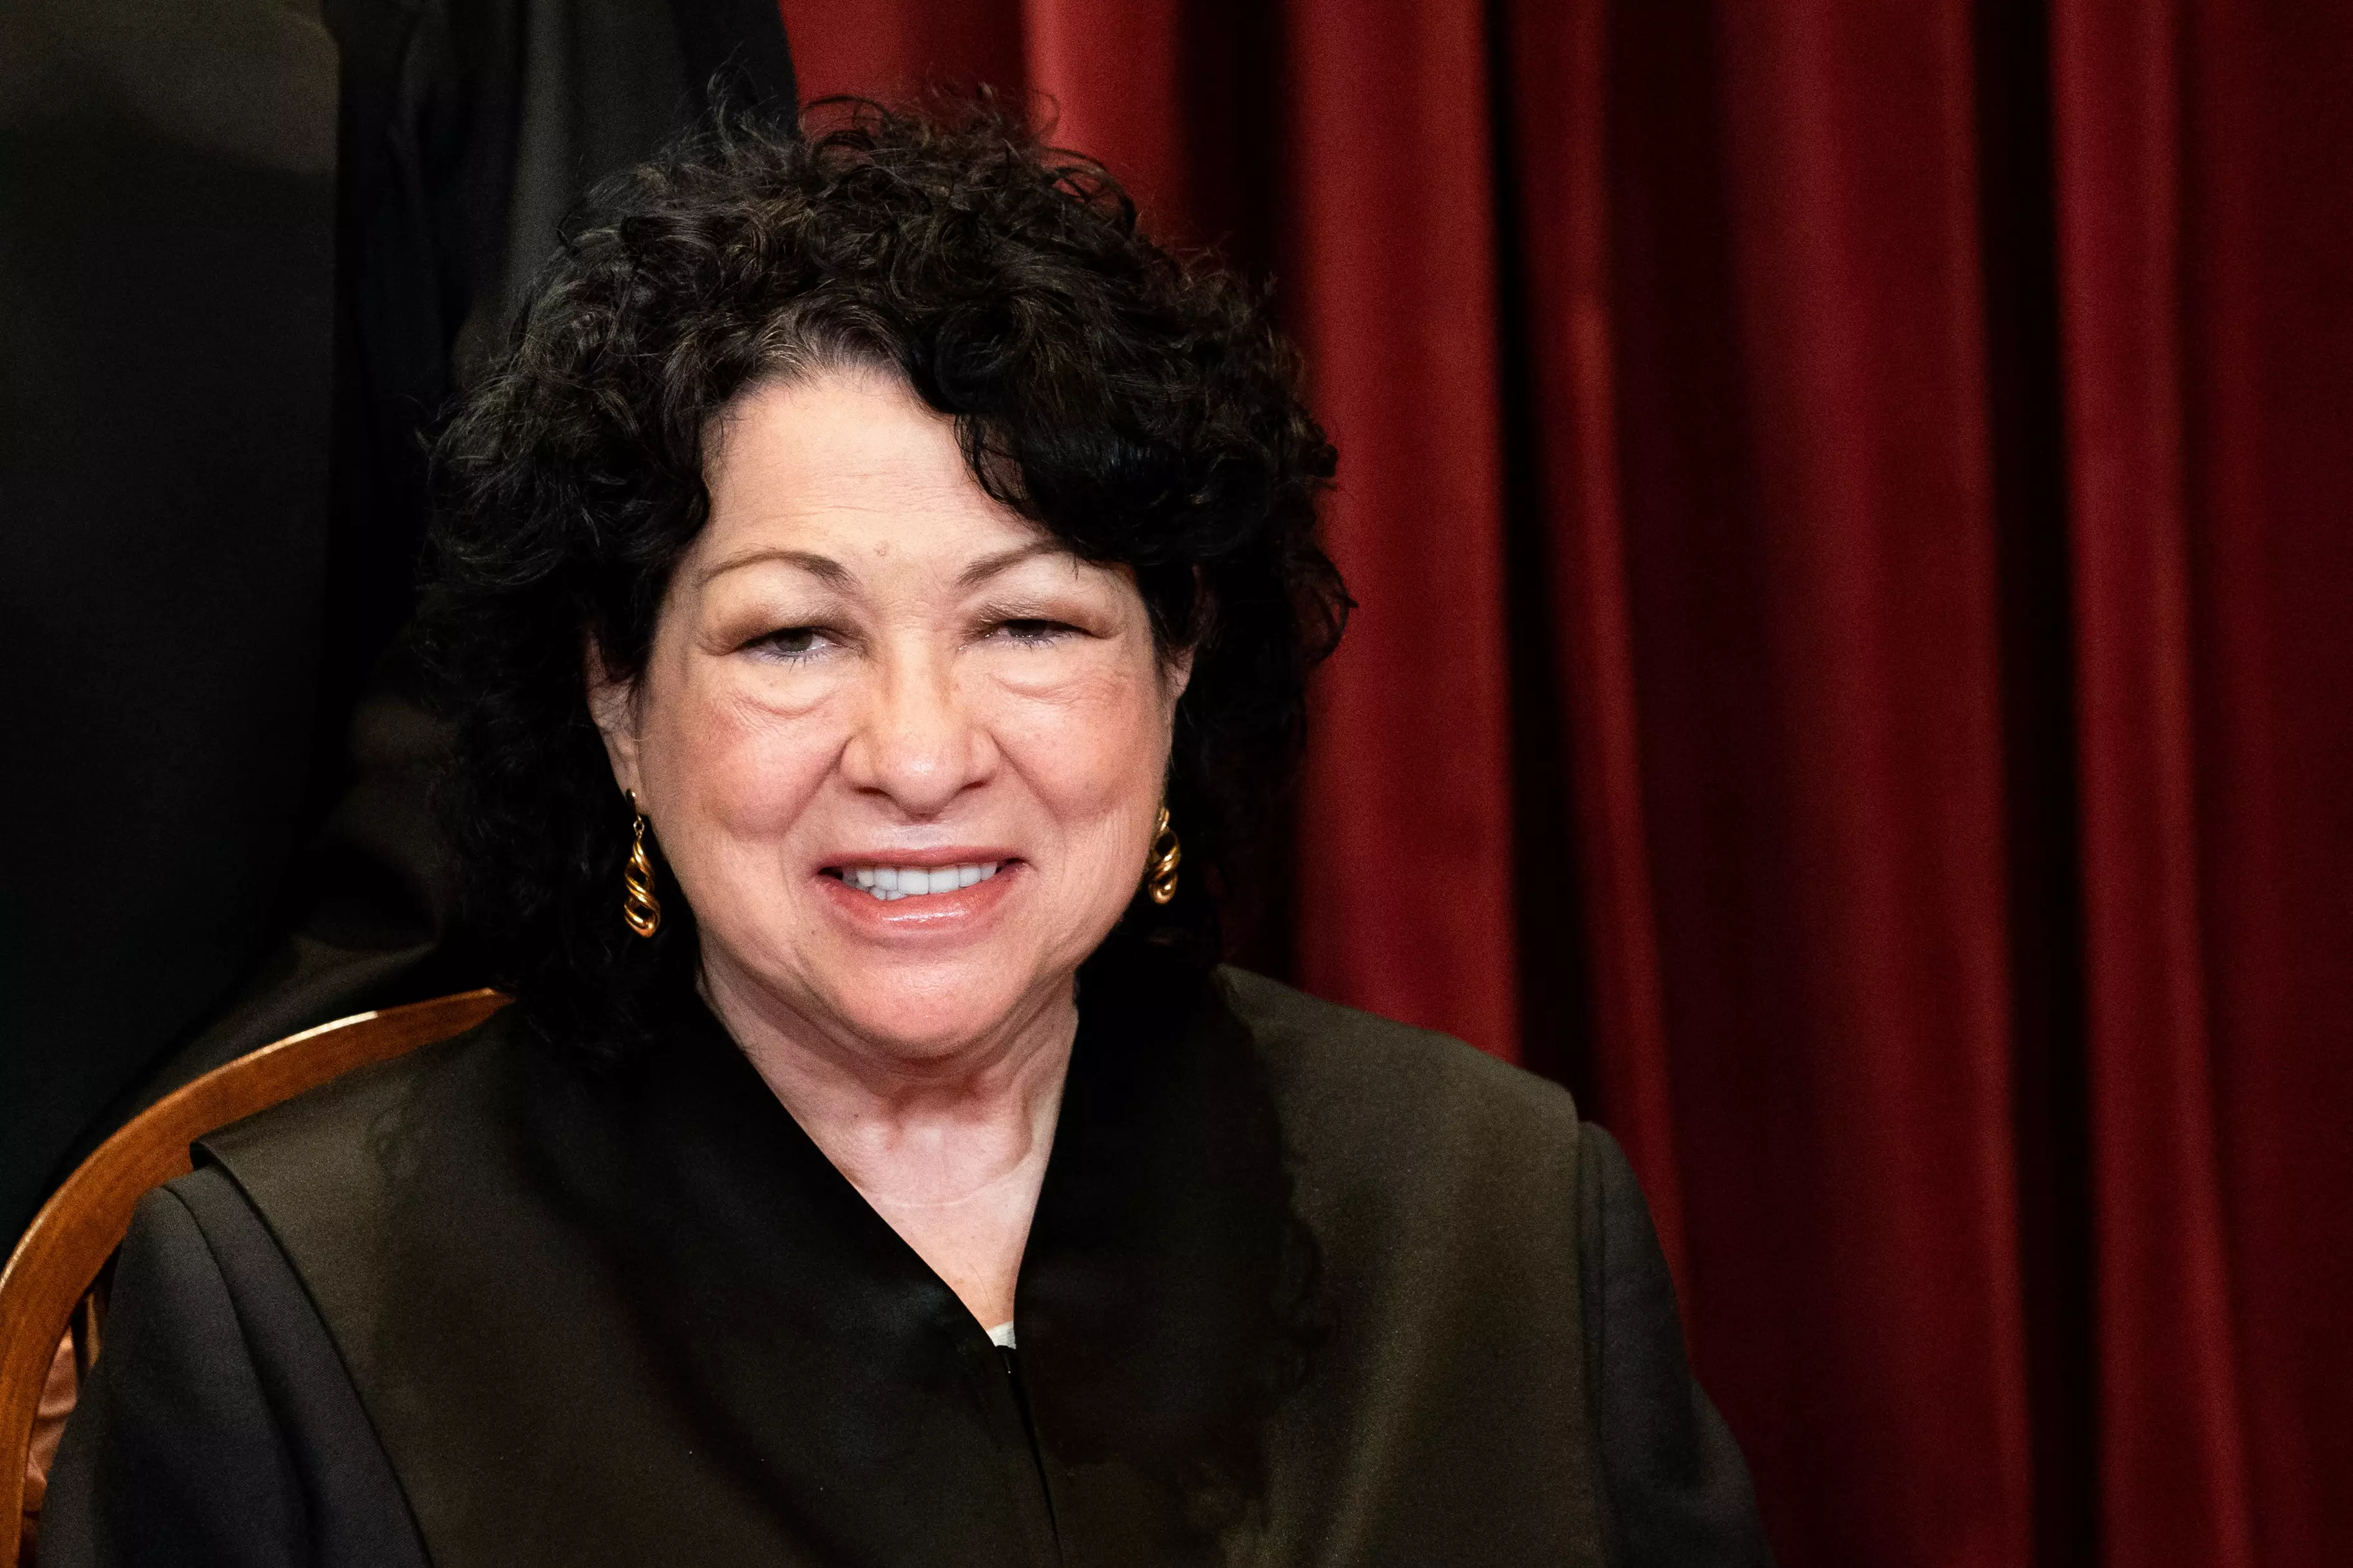 Justice Sonia Sotomayor, pictured, said the punishment would be 'cruel' should it go ahead as planned.